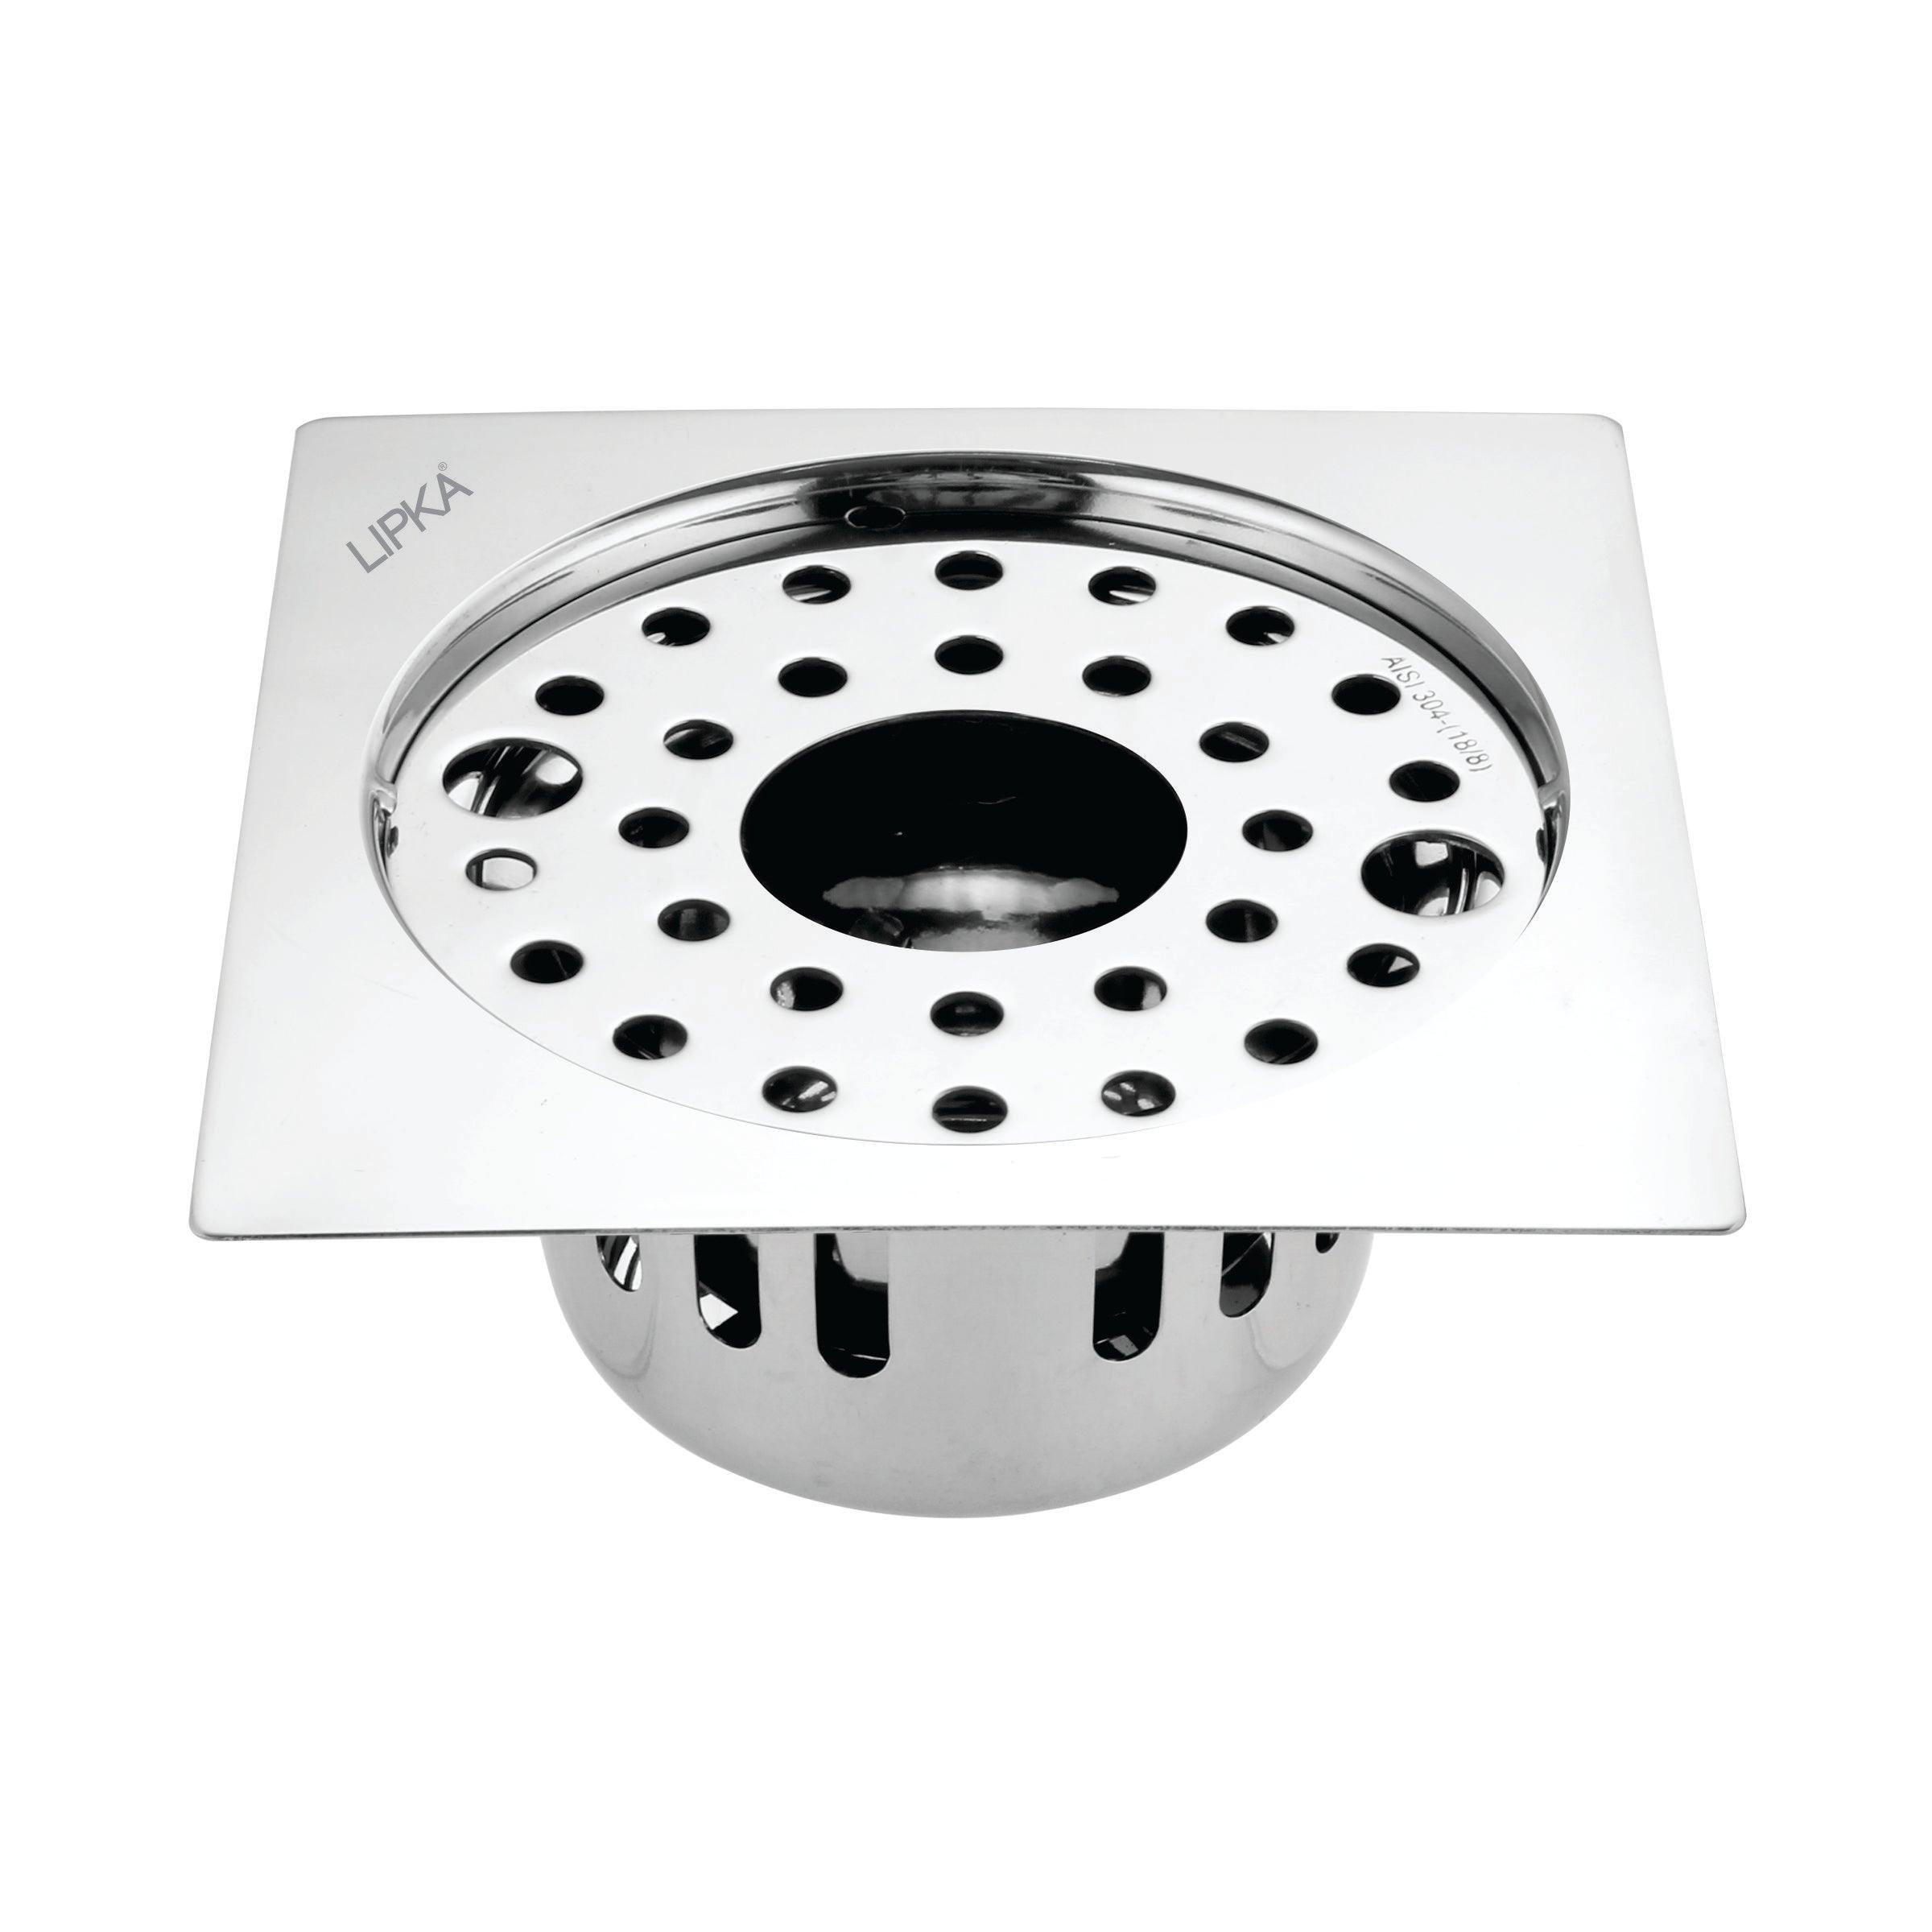 Square Flat Cut Floor Drain (5.5 x 5.5 Inches) with Lock, Hole and Cockroach Trap - LIPKA - Lipka Home